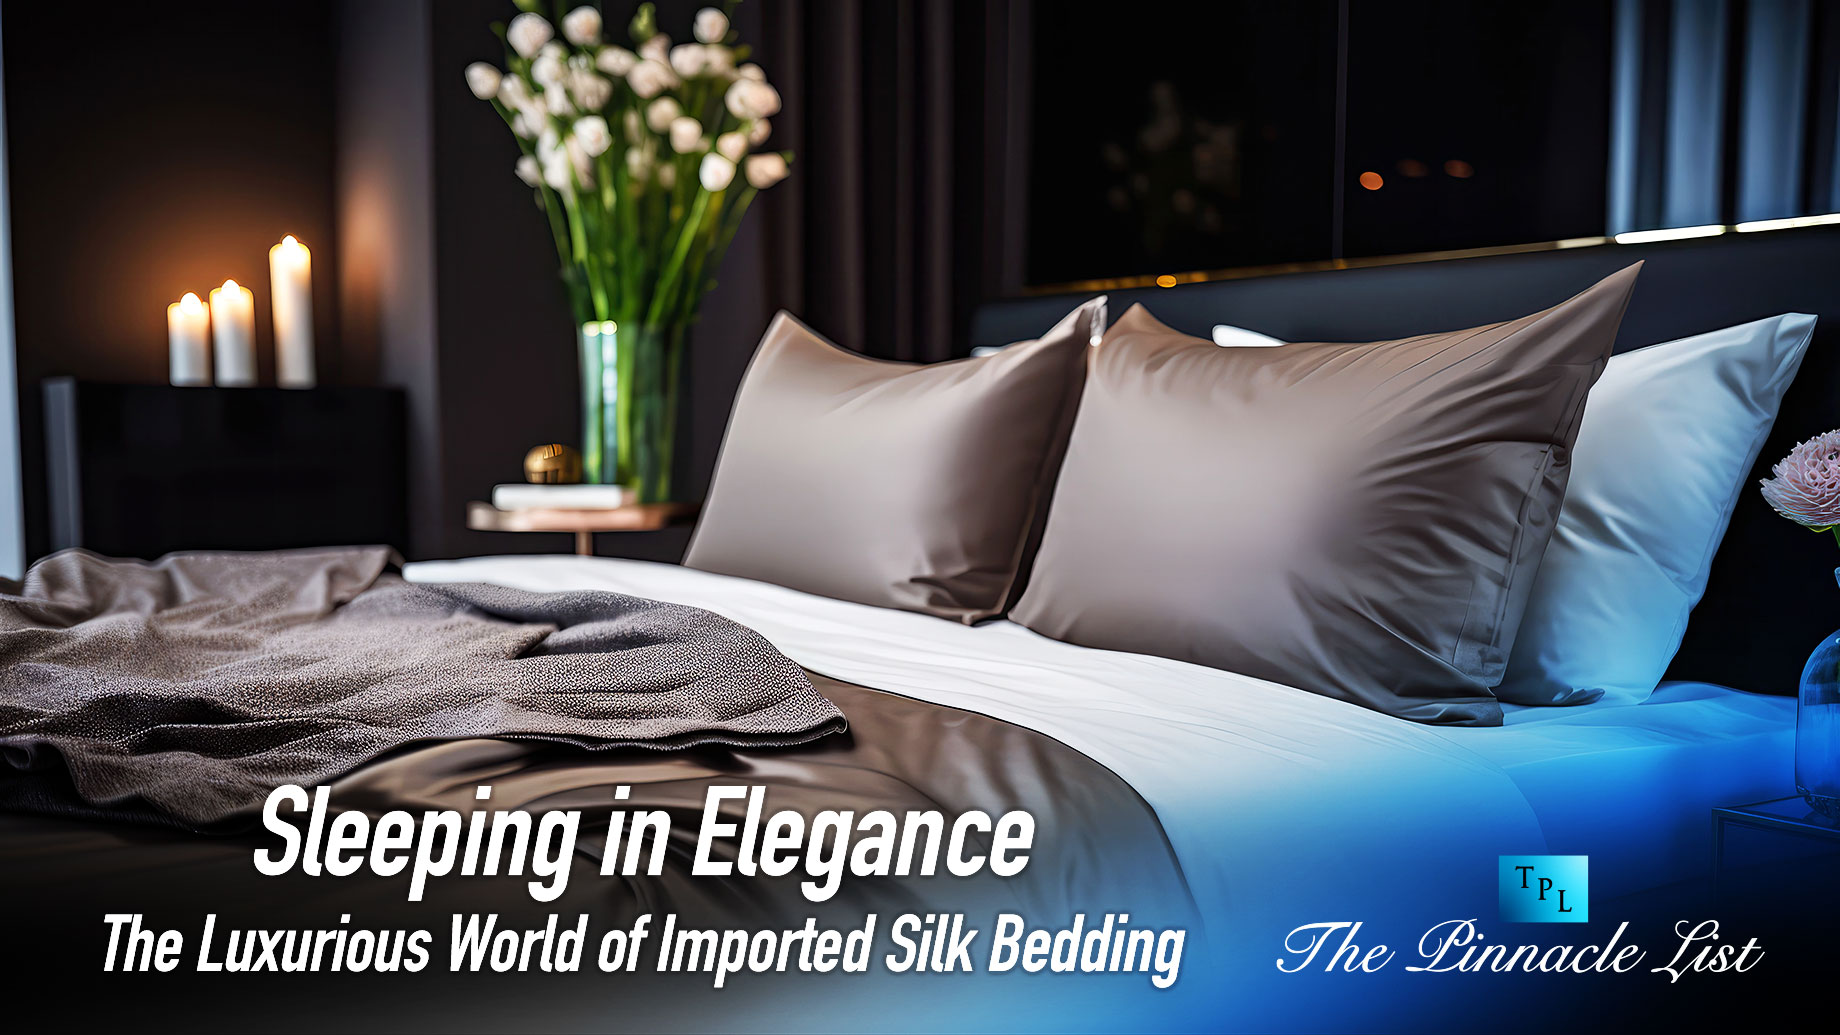 Sleeping in Elegance: The Luxurious World of Imported Silk Bedding